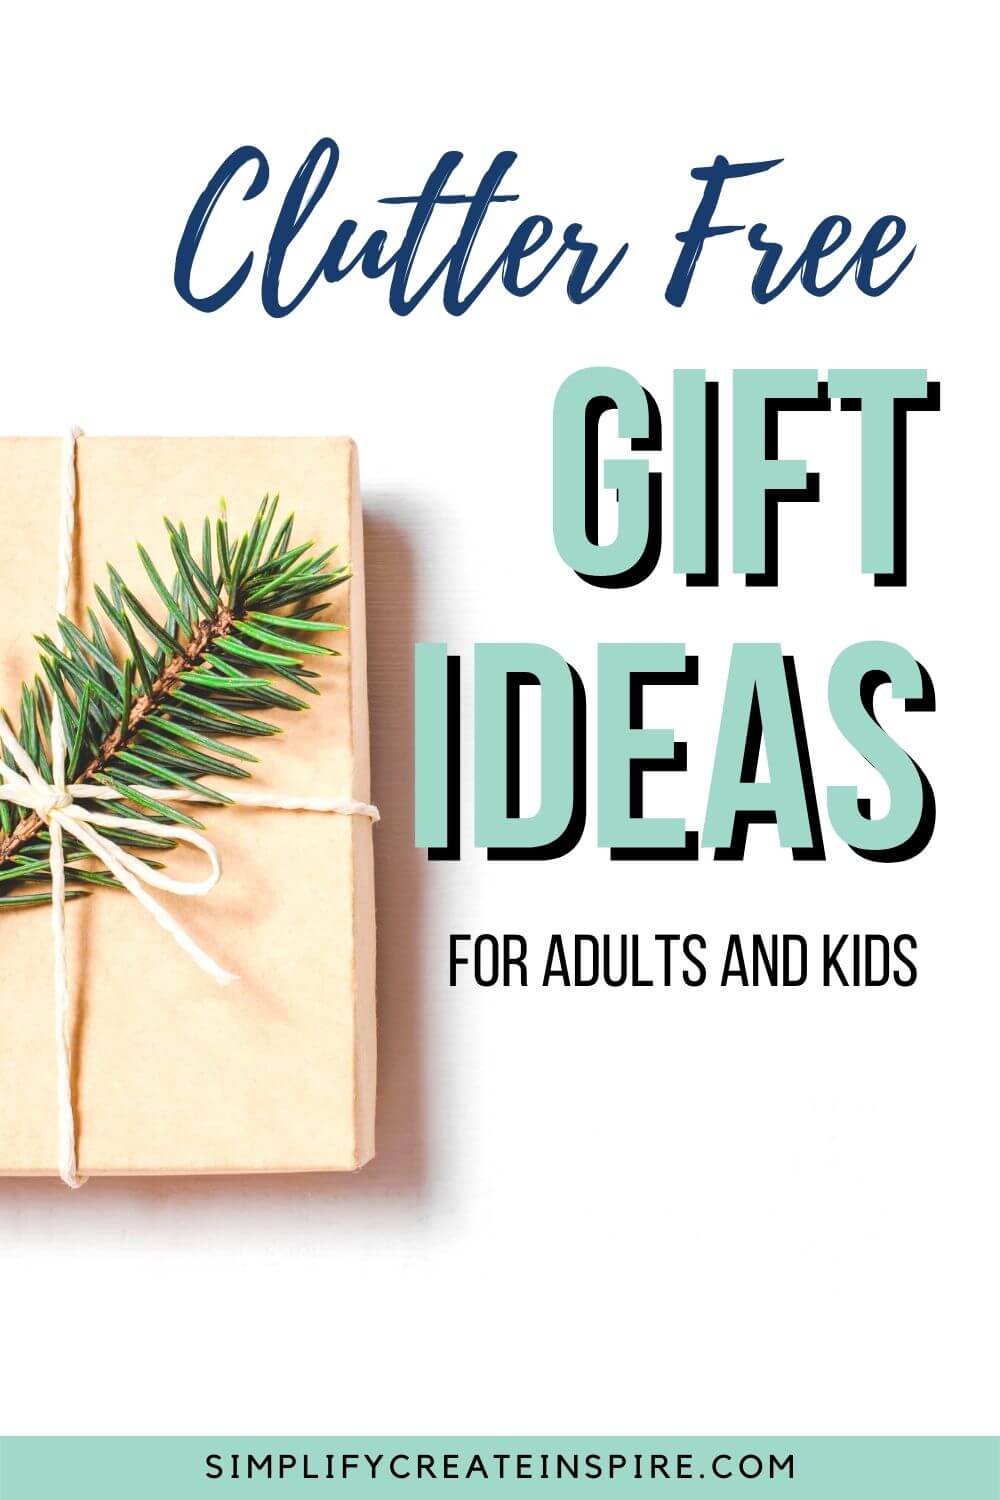 Clutter free gift ideas